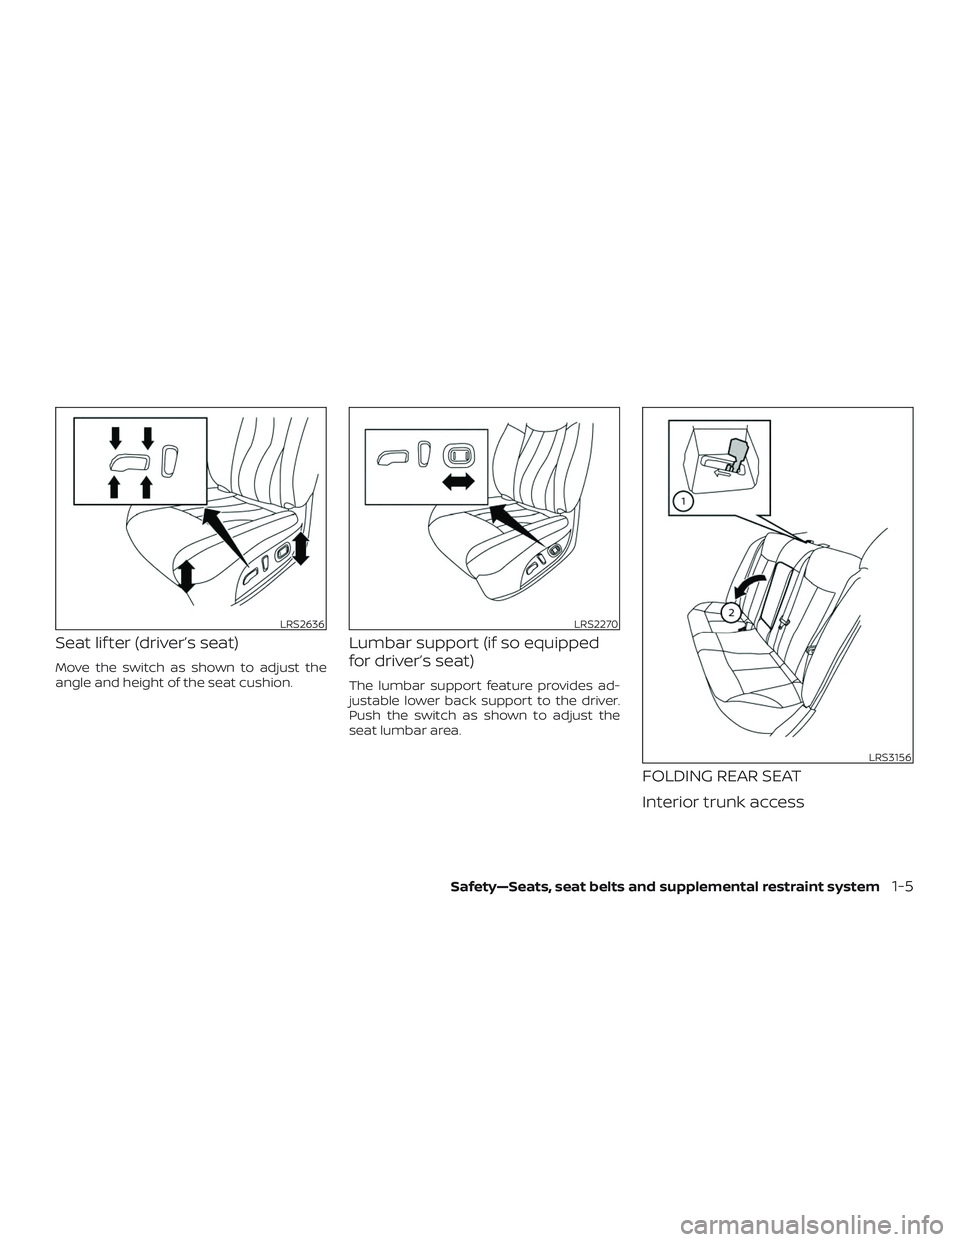 NISSAN ALTIMA 2019  Owner´s Manual Seat lif ter (driver’s seat)
Move the switch as shown to adjust the
angle and height of the seat cushion.
Lumbar support (if so equipped
for driver’s seat)
The lumbar support feature provides ad-
